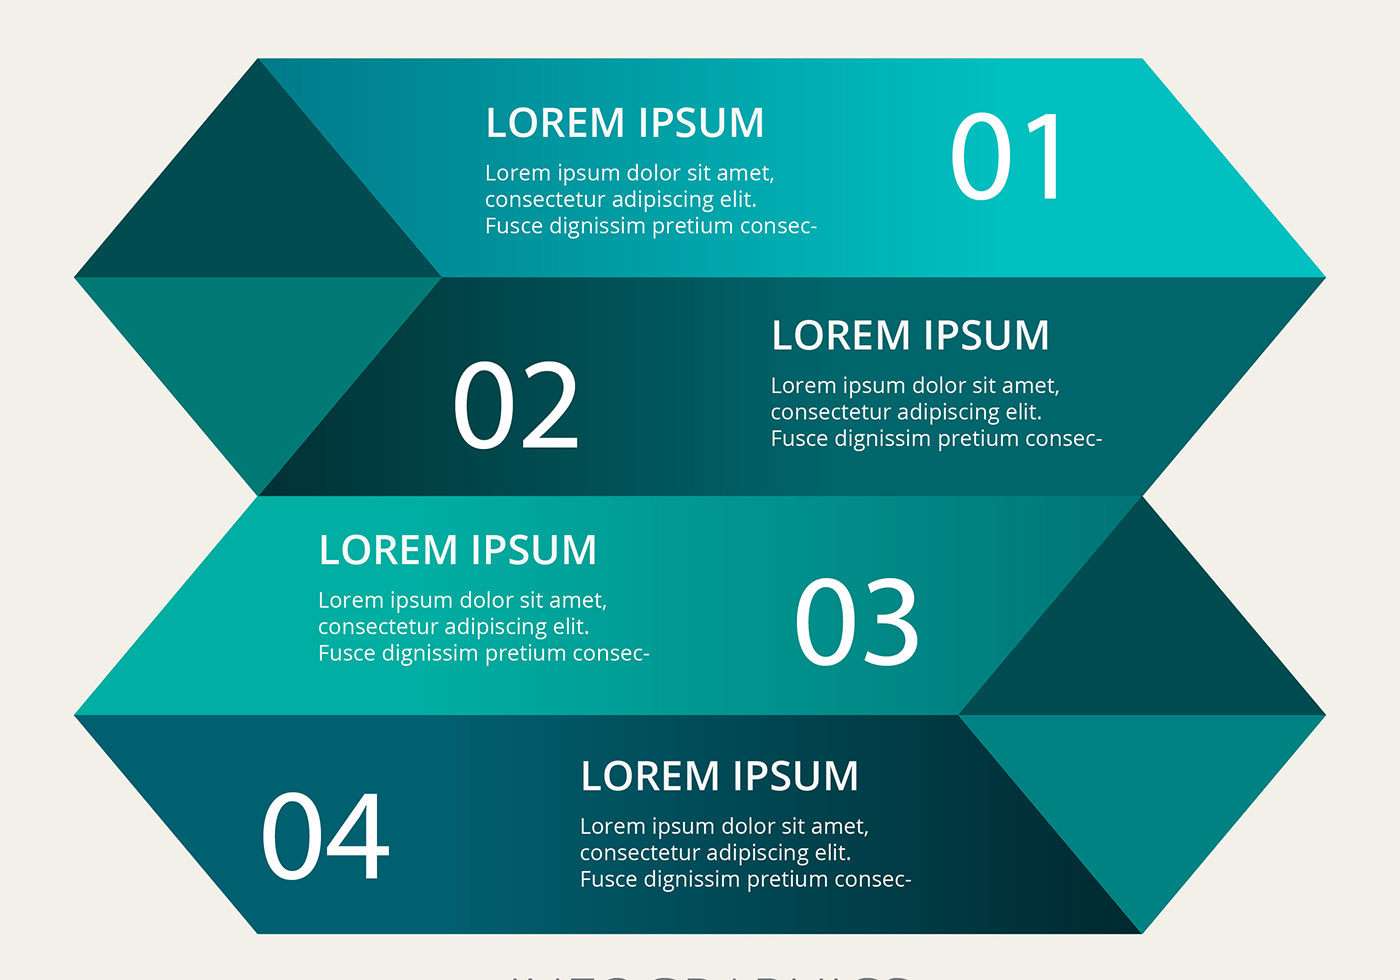 b"Ill create MODERN INFOGRAPHIC just 24hrs for $5 - SEOClerks"